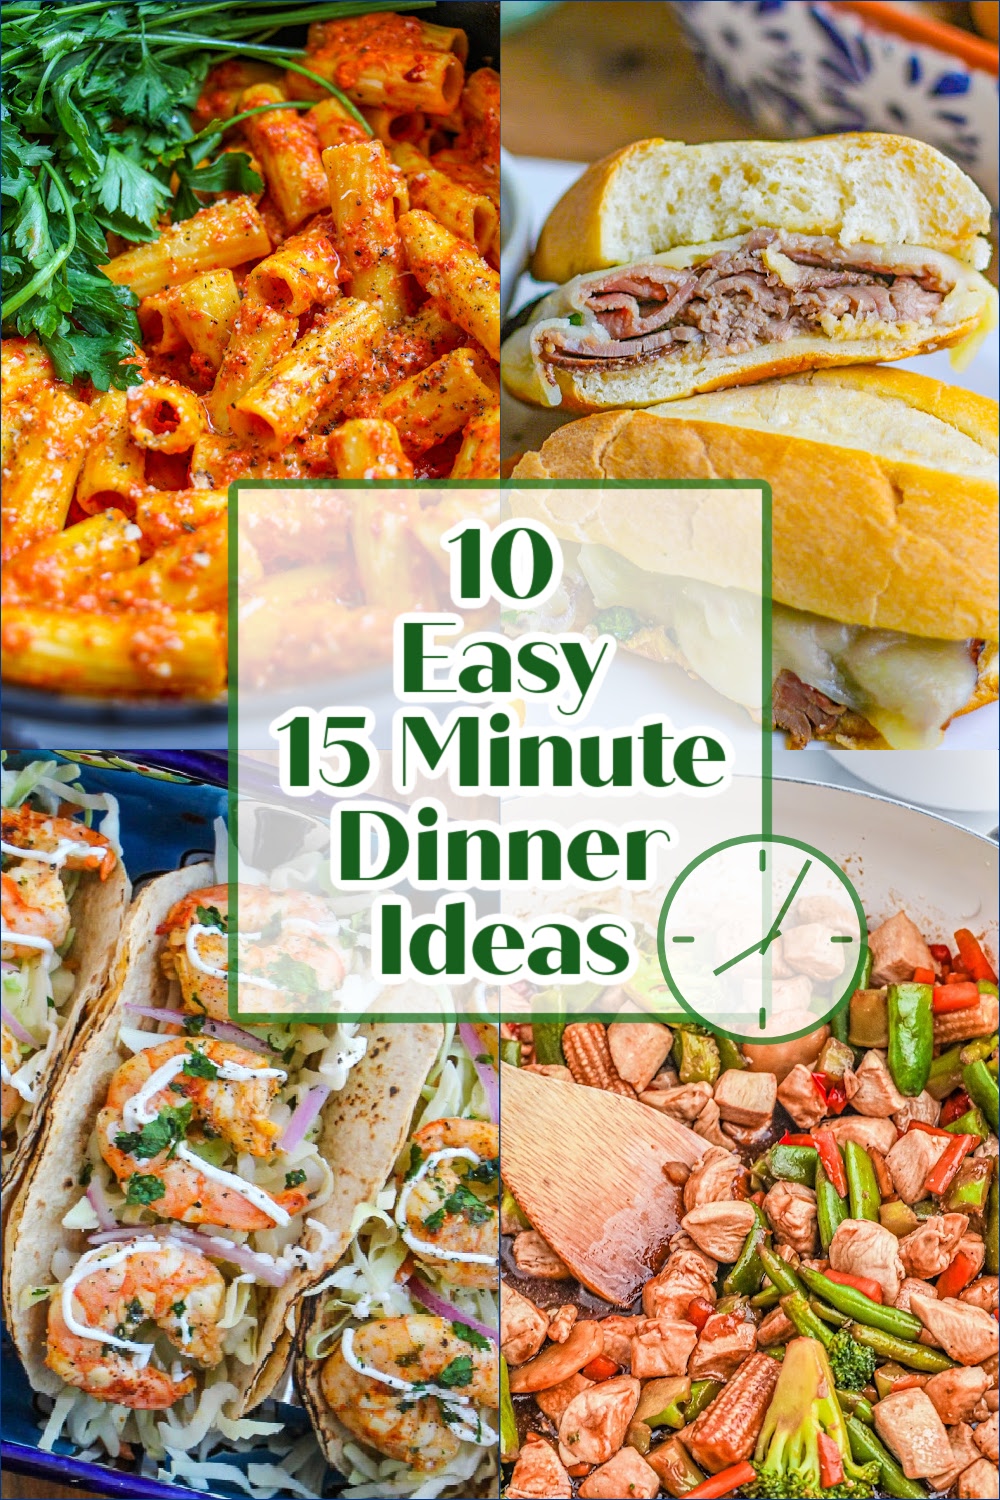 Collage image with the title 10 Easy 15 Minute Dinner Ideas printed over it.